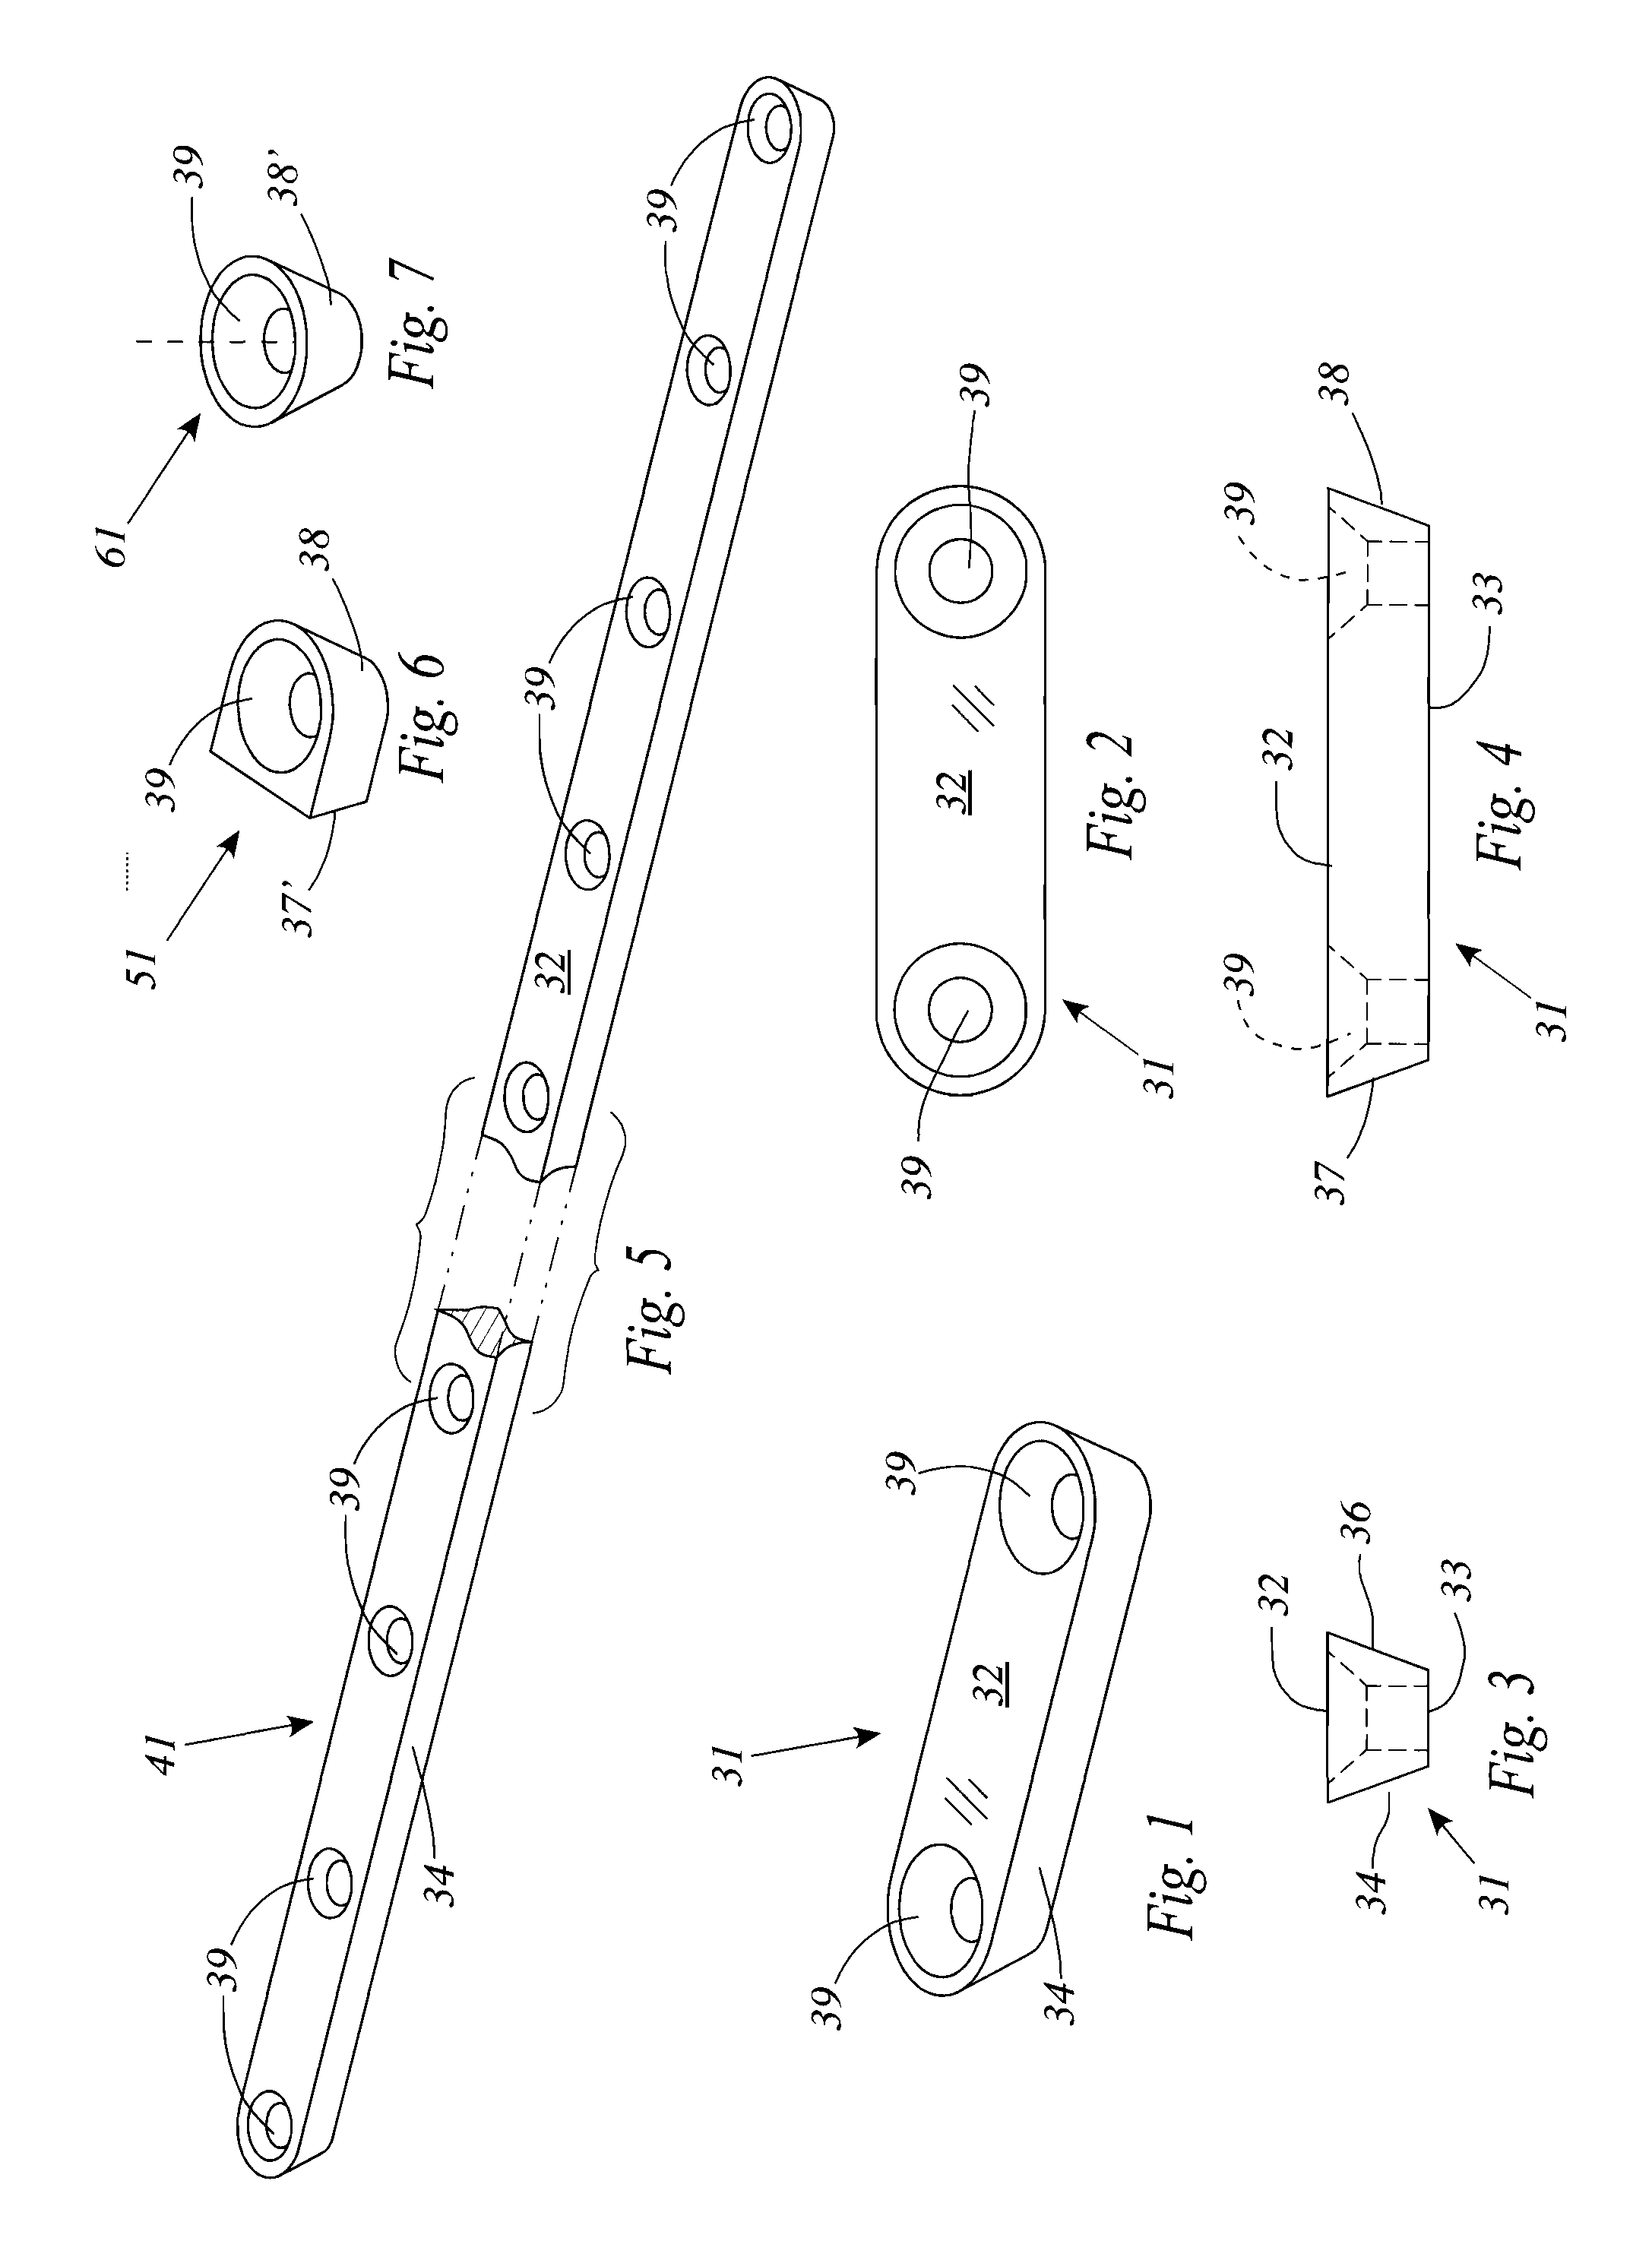 Furniture component joining system